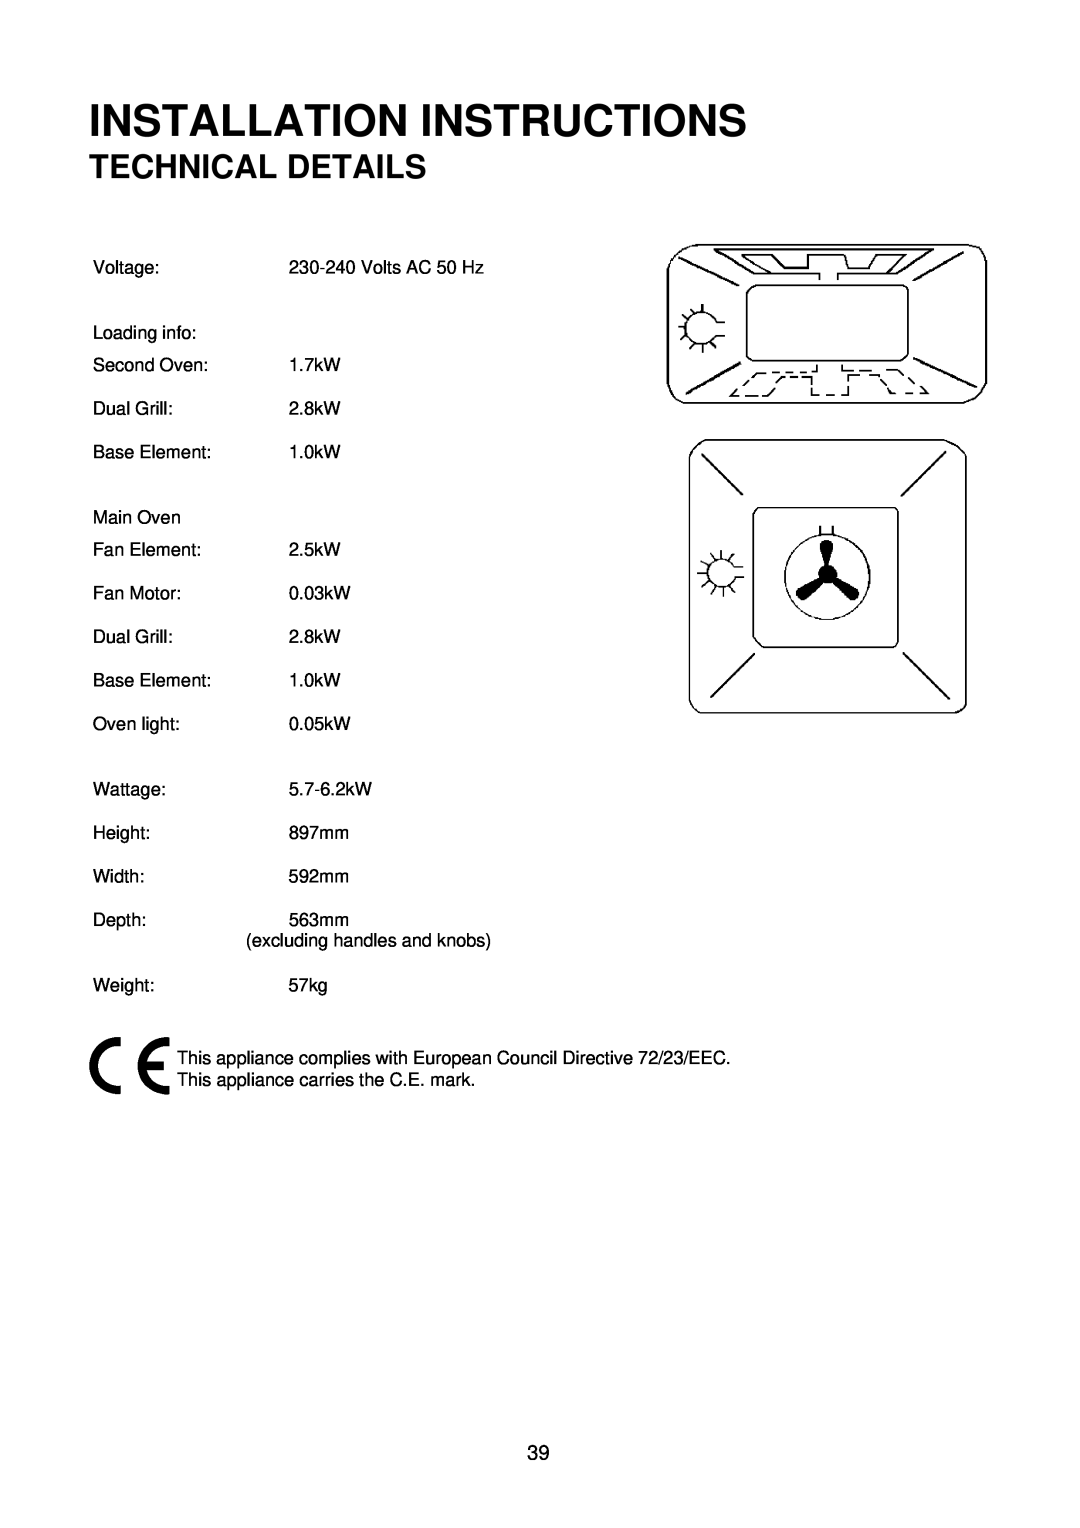 Electrolux D4100-1 operating instructions Installation Instructions, Technical Details 